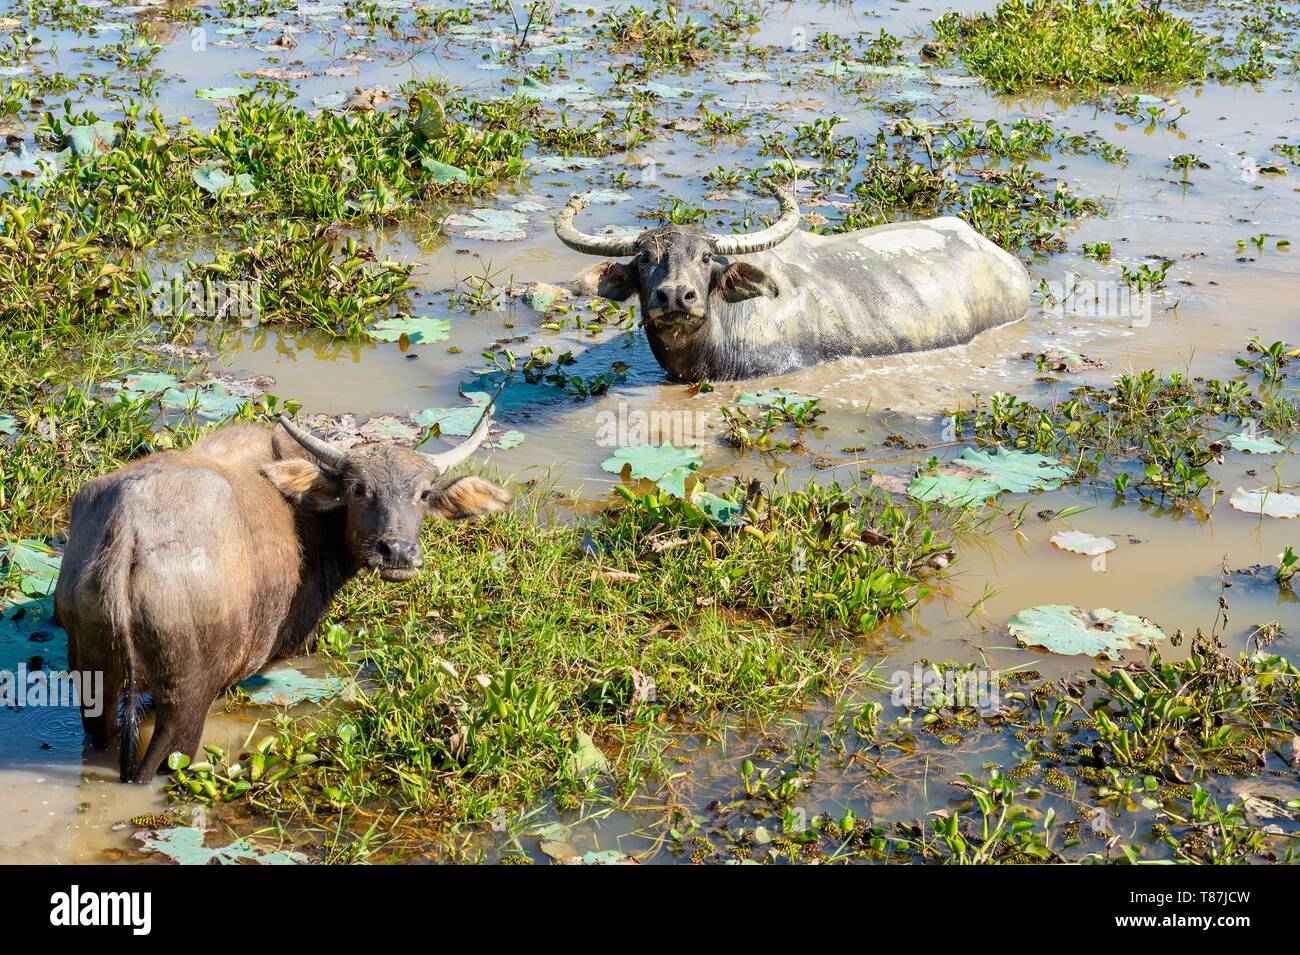 India, Assam, Majuli island in the middle of the Brahmapoutre river, buffalos Stock Photo